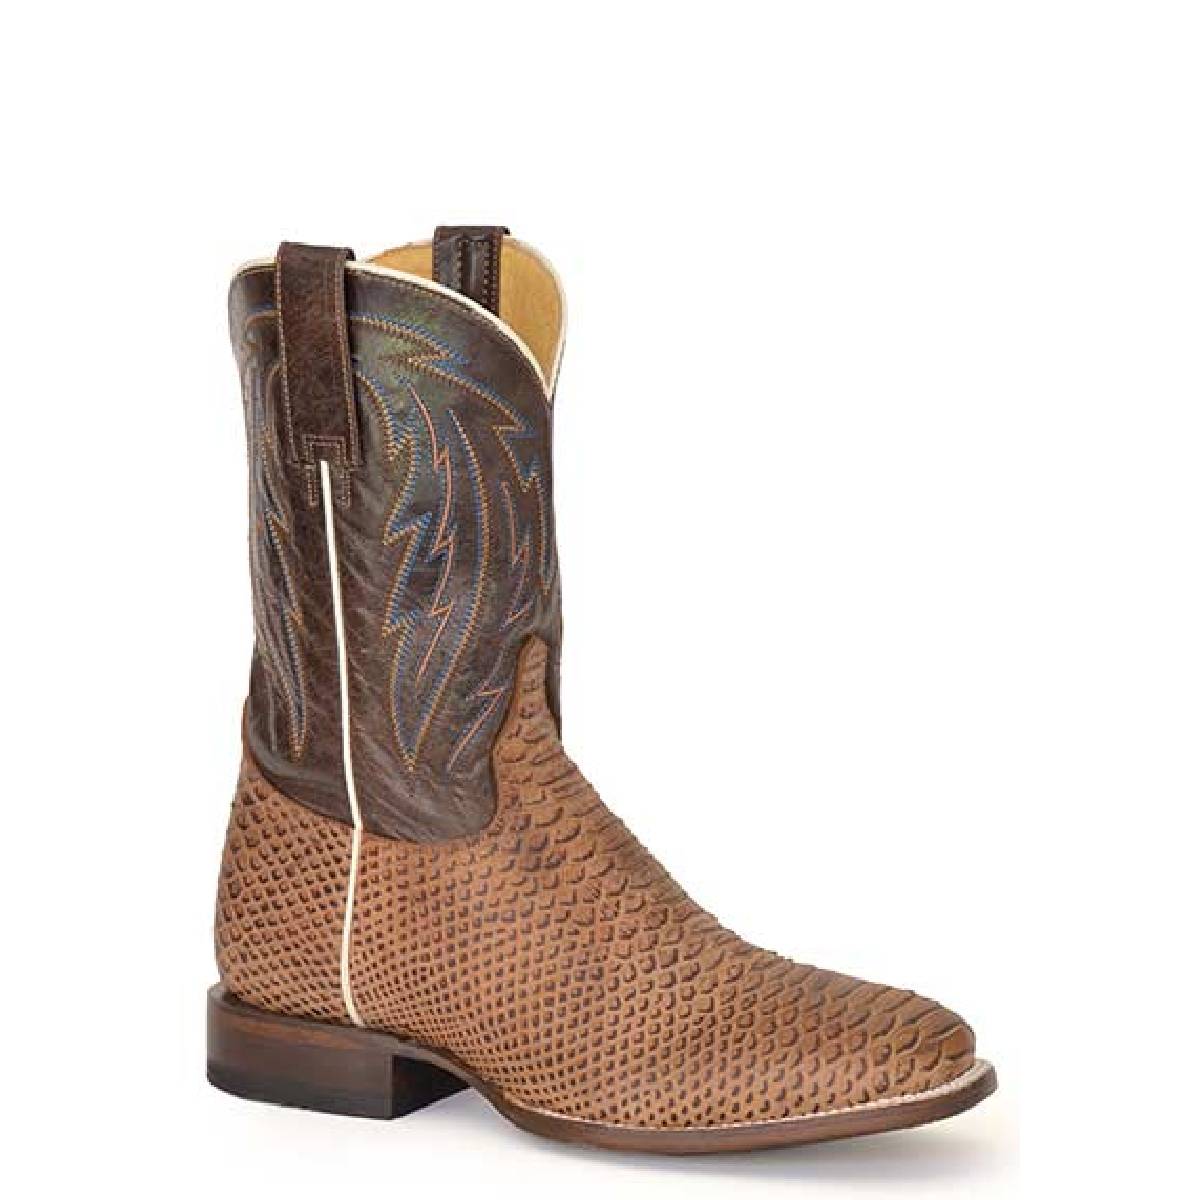 Men's Roper Almost Python PRINT Leather Boots Handcrafted Brown - yeehawcowboy